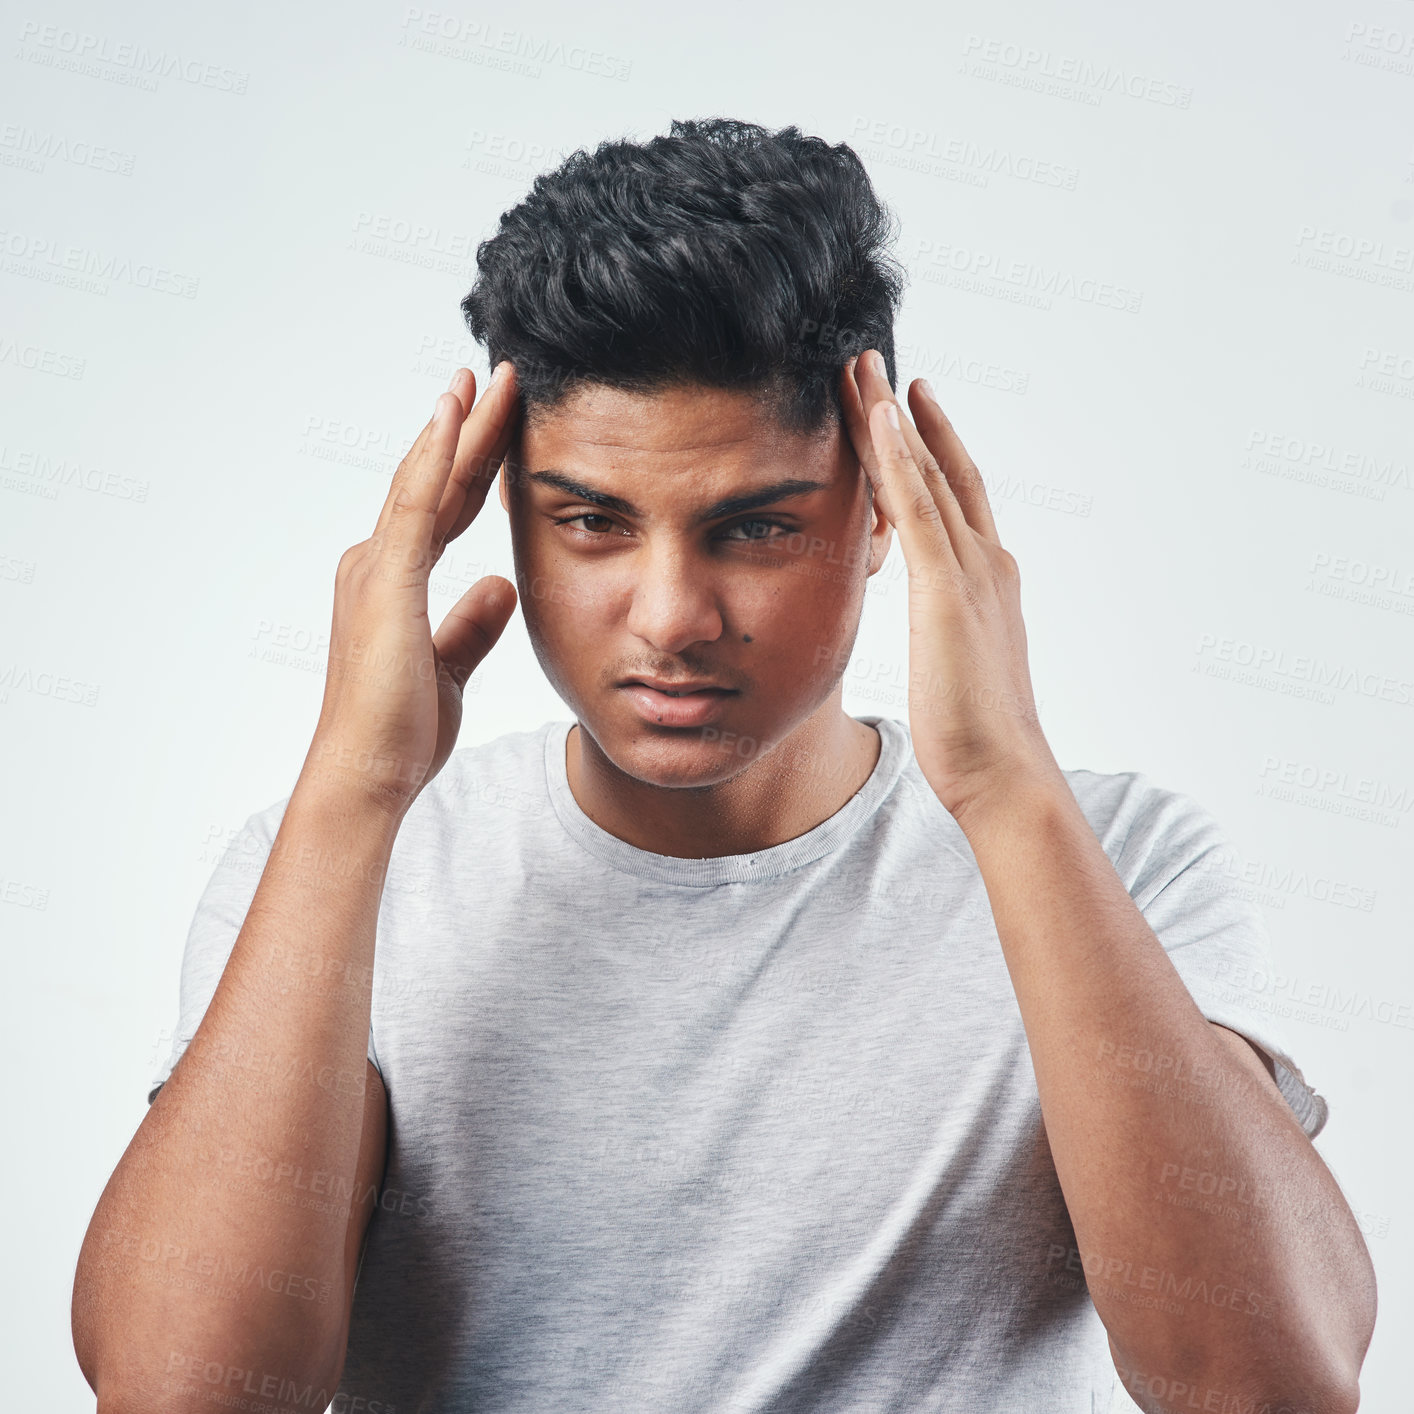 Buy stock photo Studio shot of a young man suffering from a headache while standing against a white background